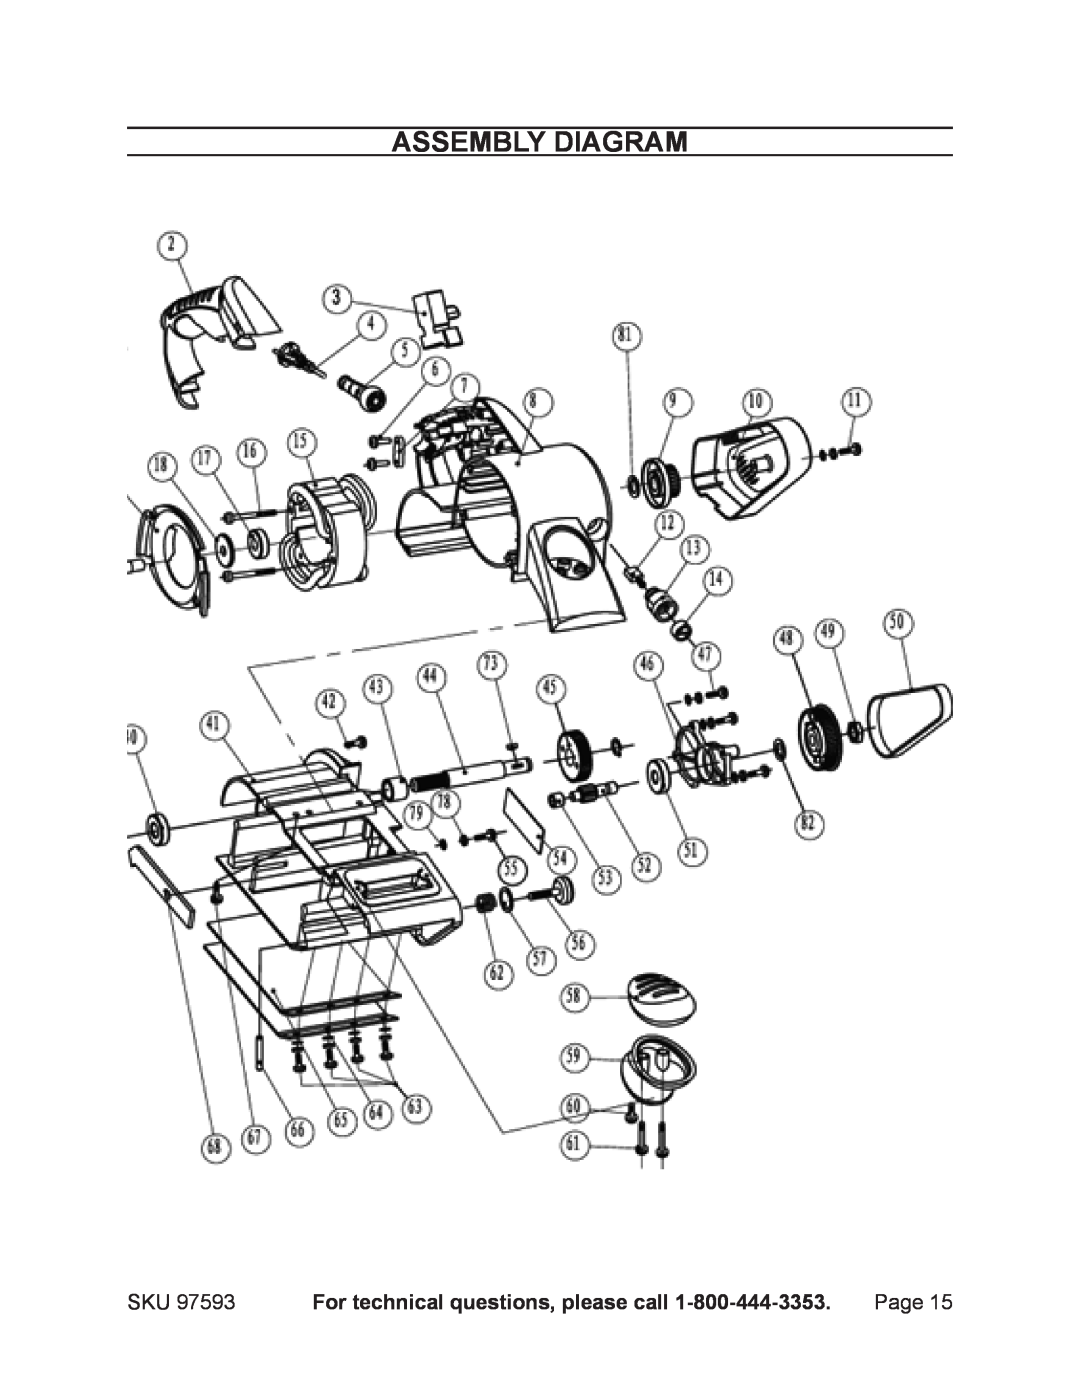 Chicago Electric 97593 operating instructions Assembly diagram, For technical questions, please call 